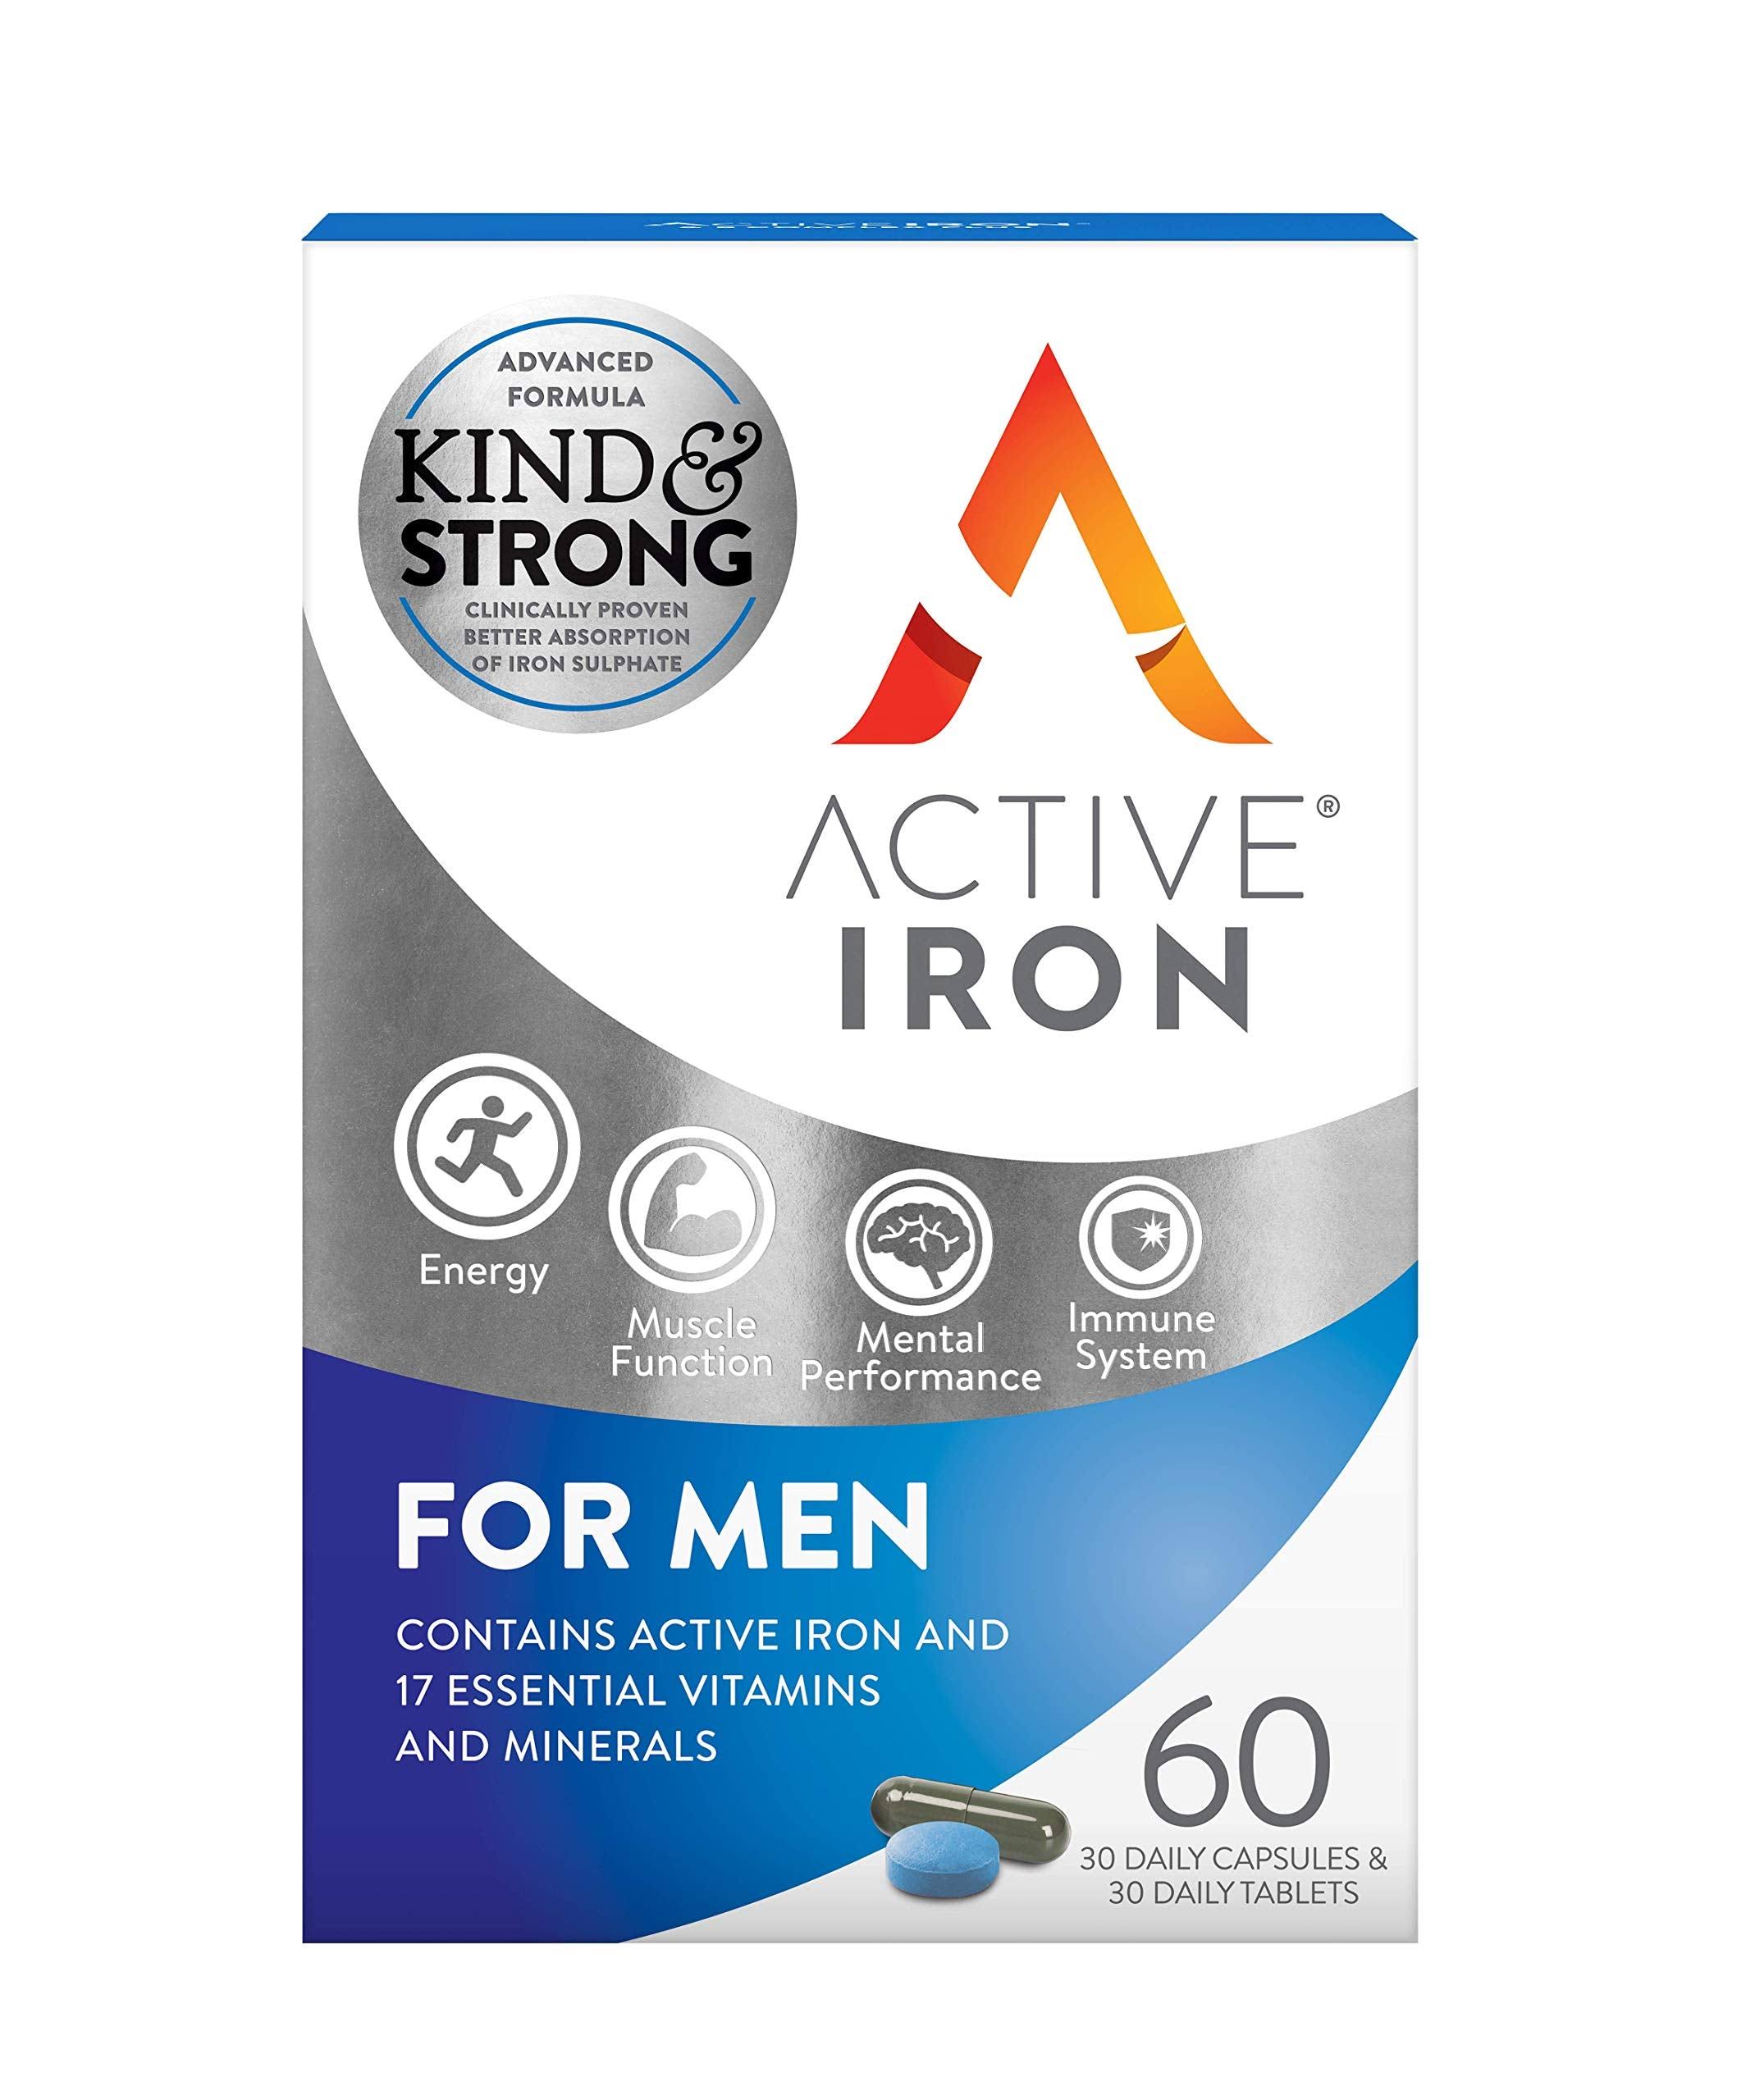 Active Iron & B Complex Plus for Men - 60cps/tbs